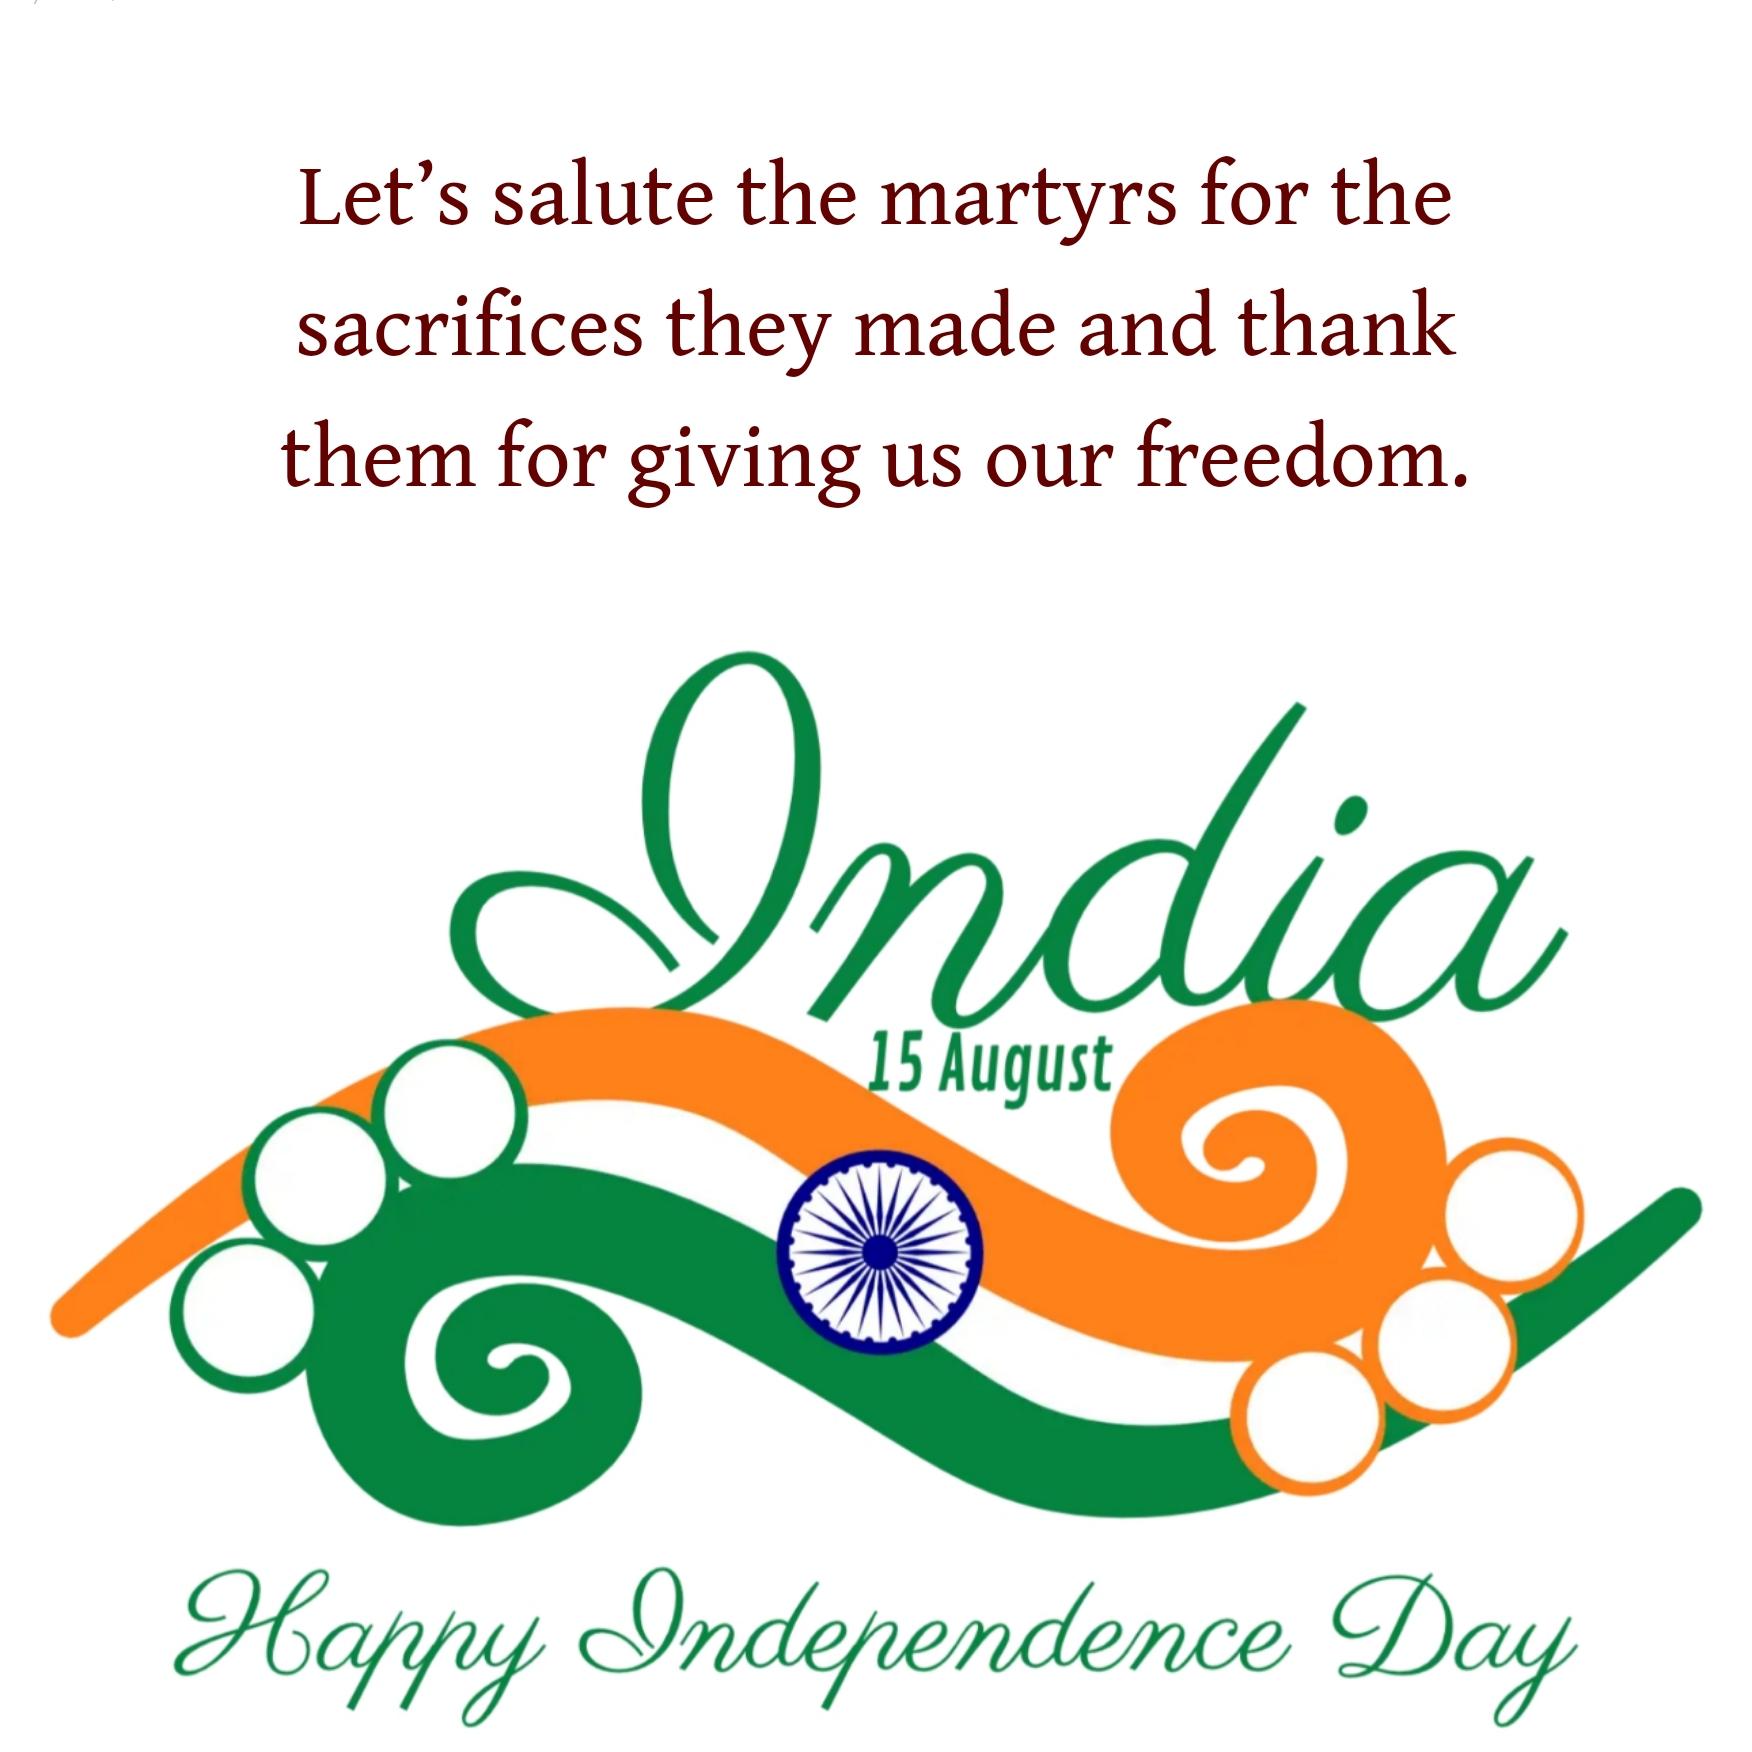 Lets salute the martyrs for the sacrifices they made